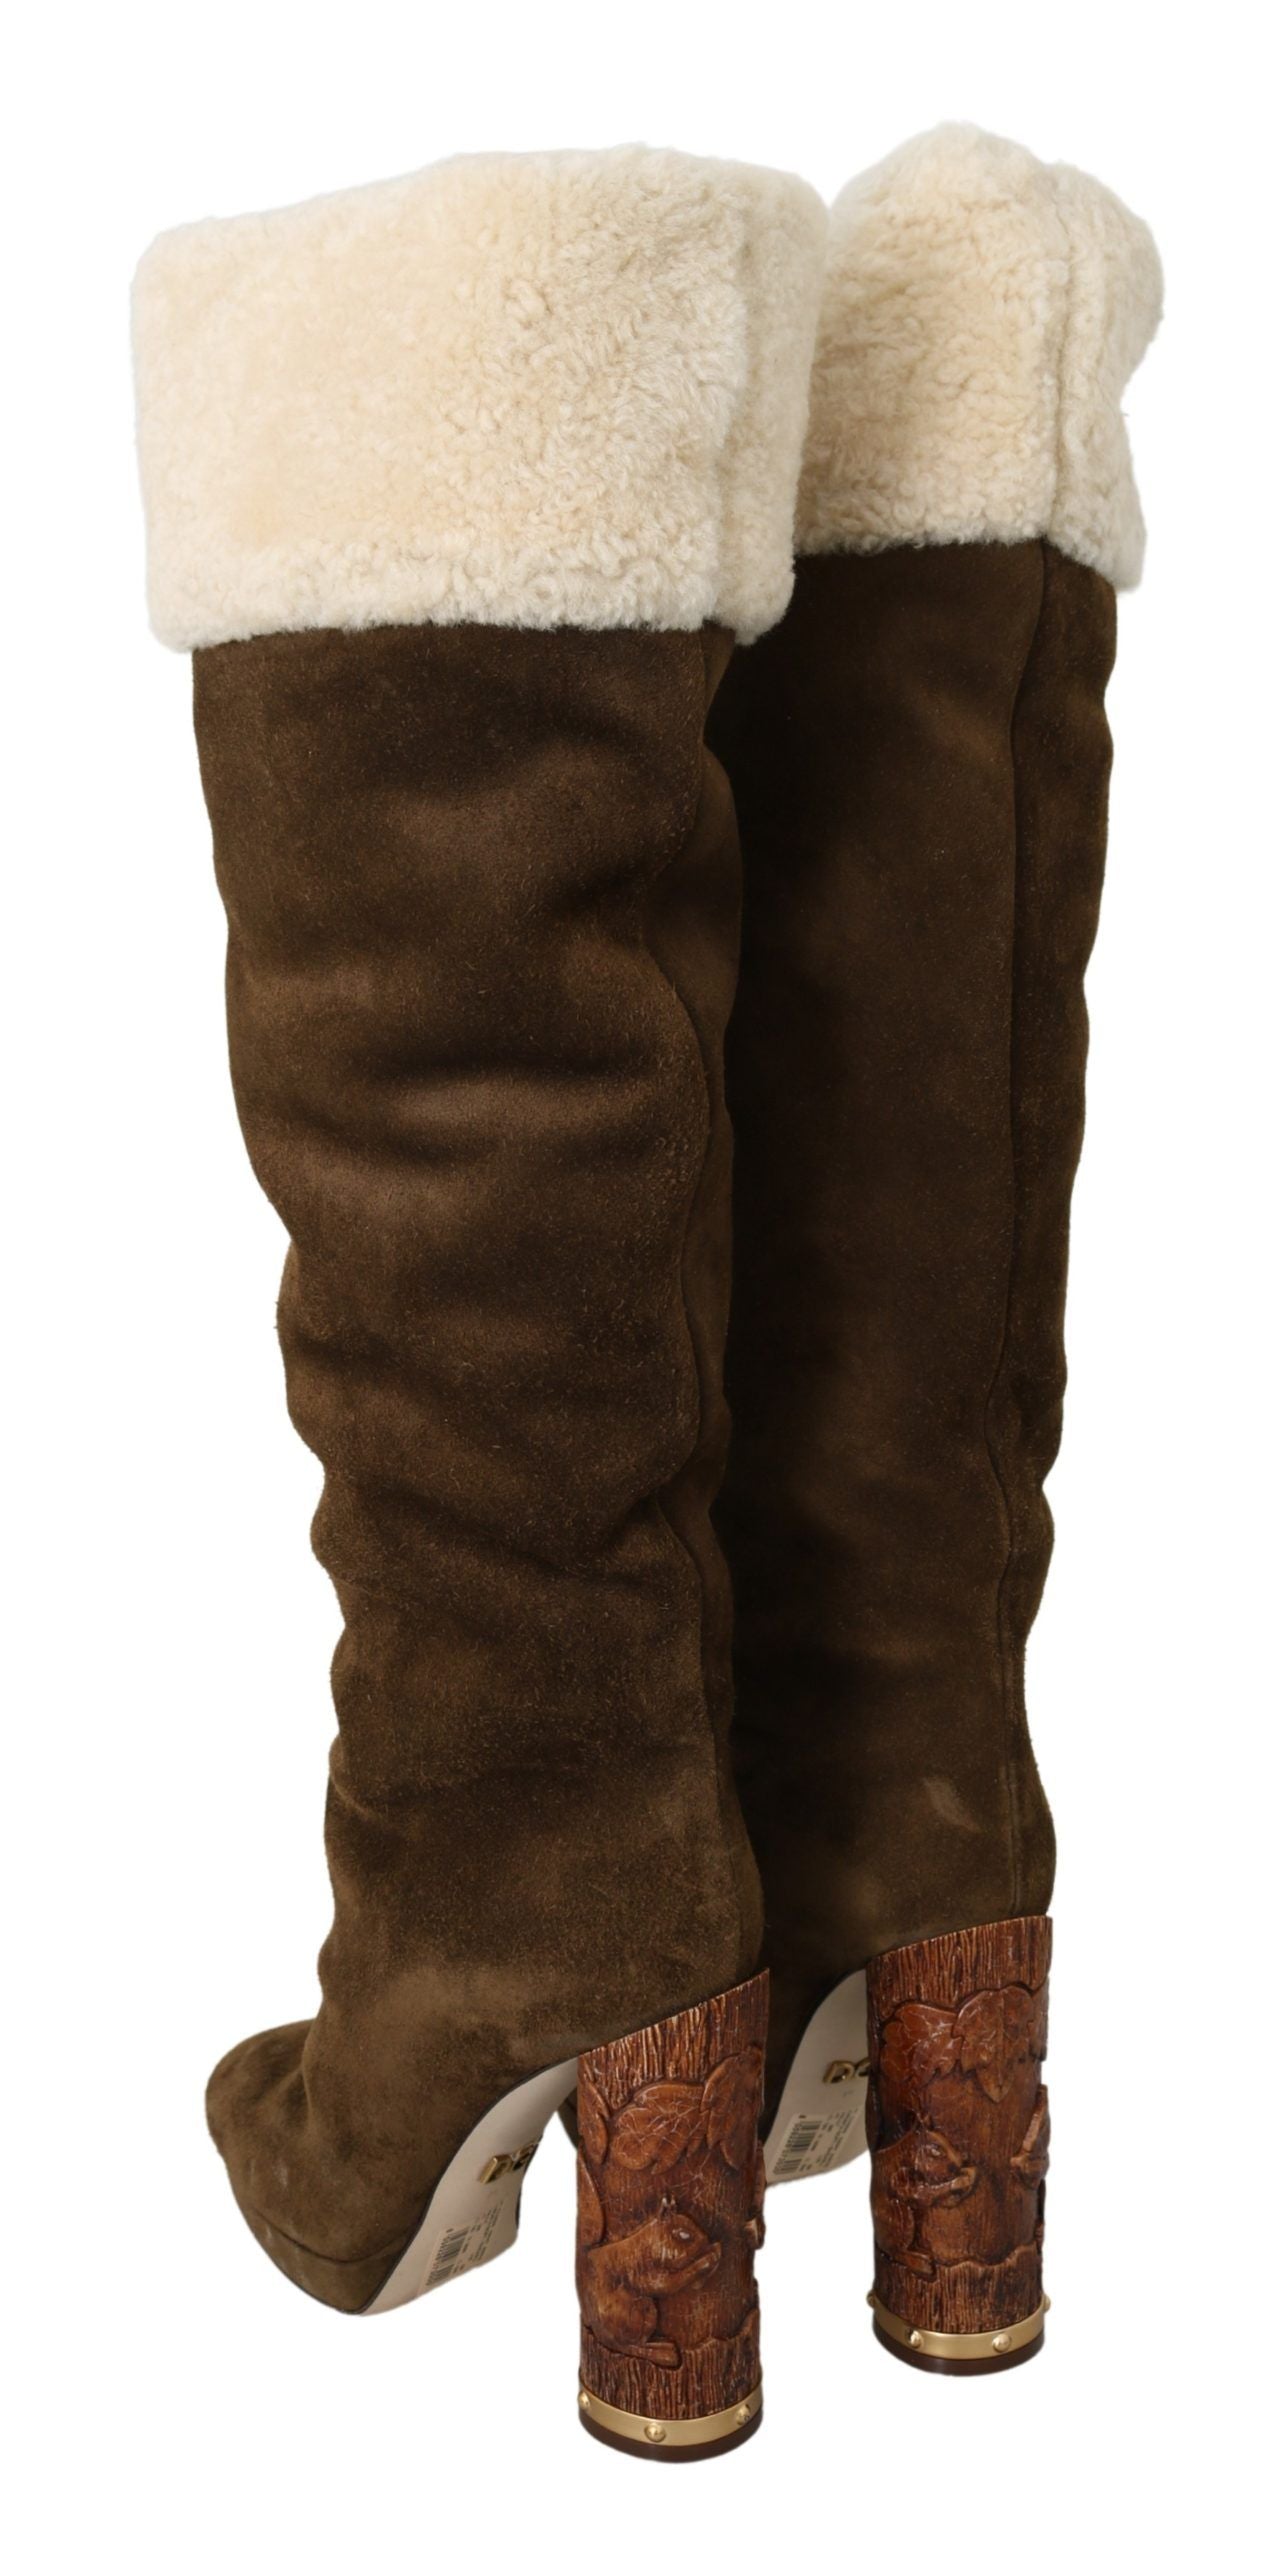 Elegant Knee High Suede Boots in Brown and White